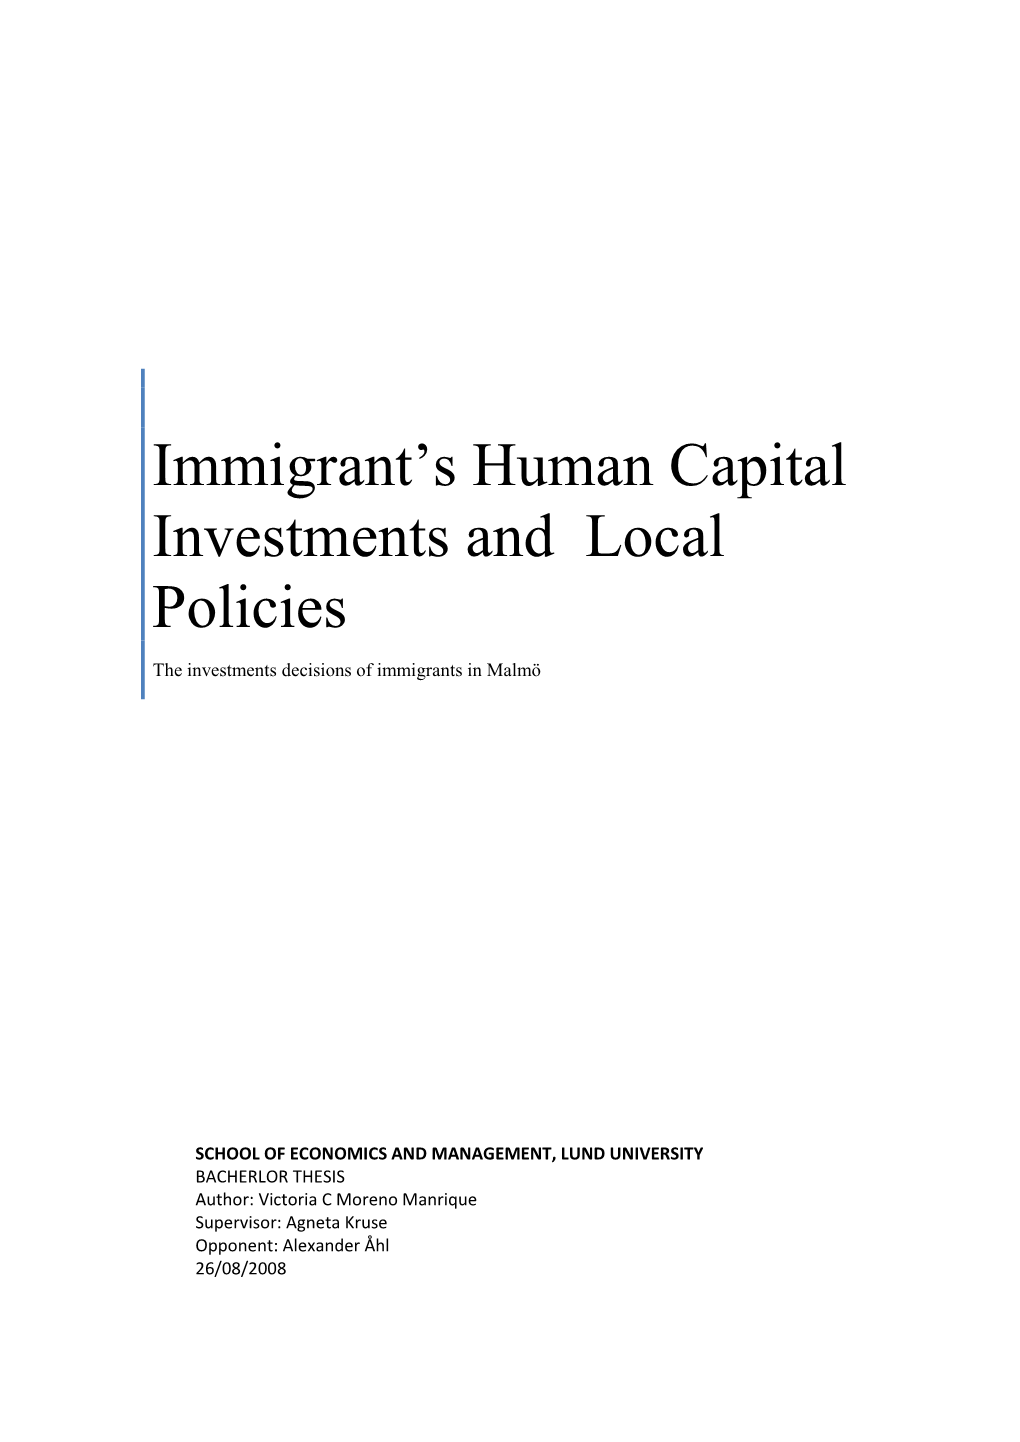 Immigrant's Human Capital Investments and Local Policies